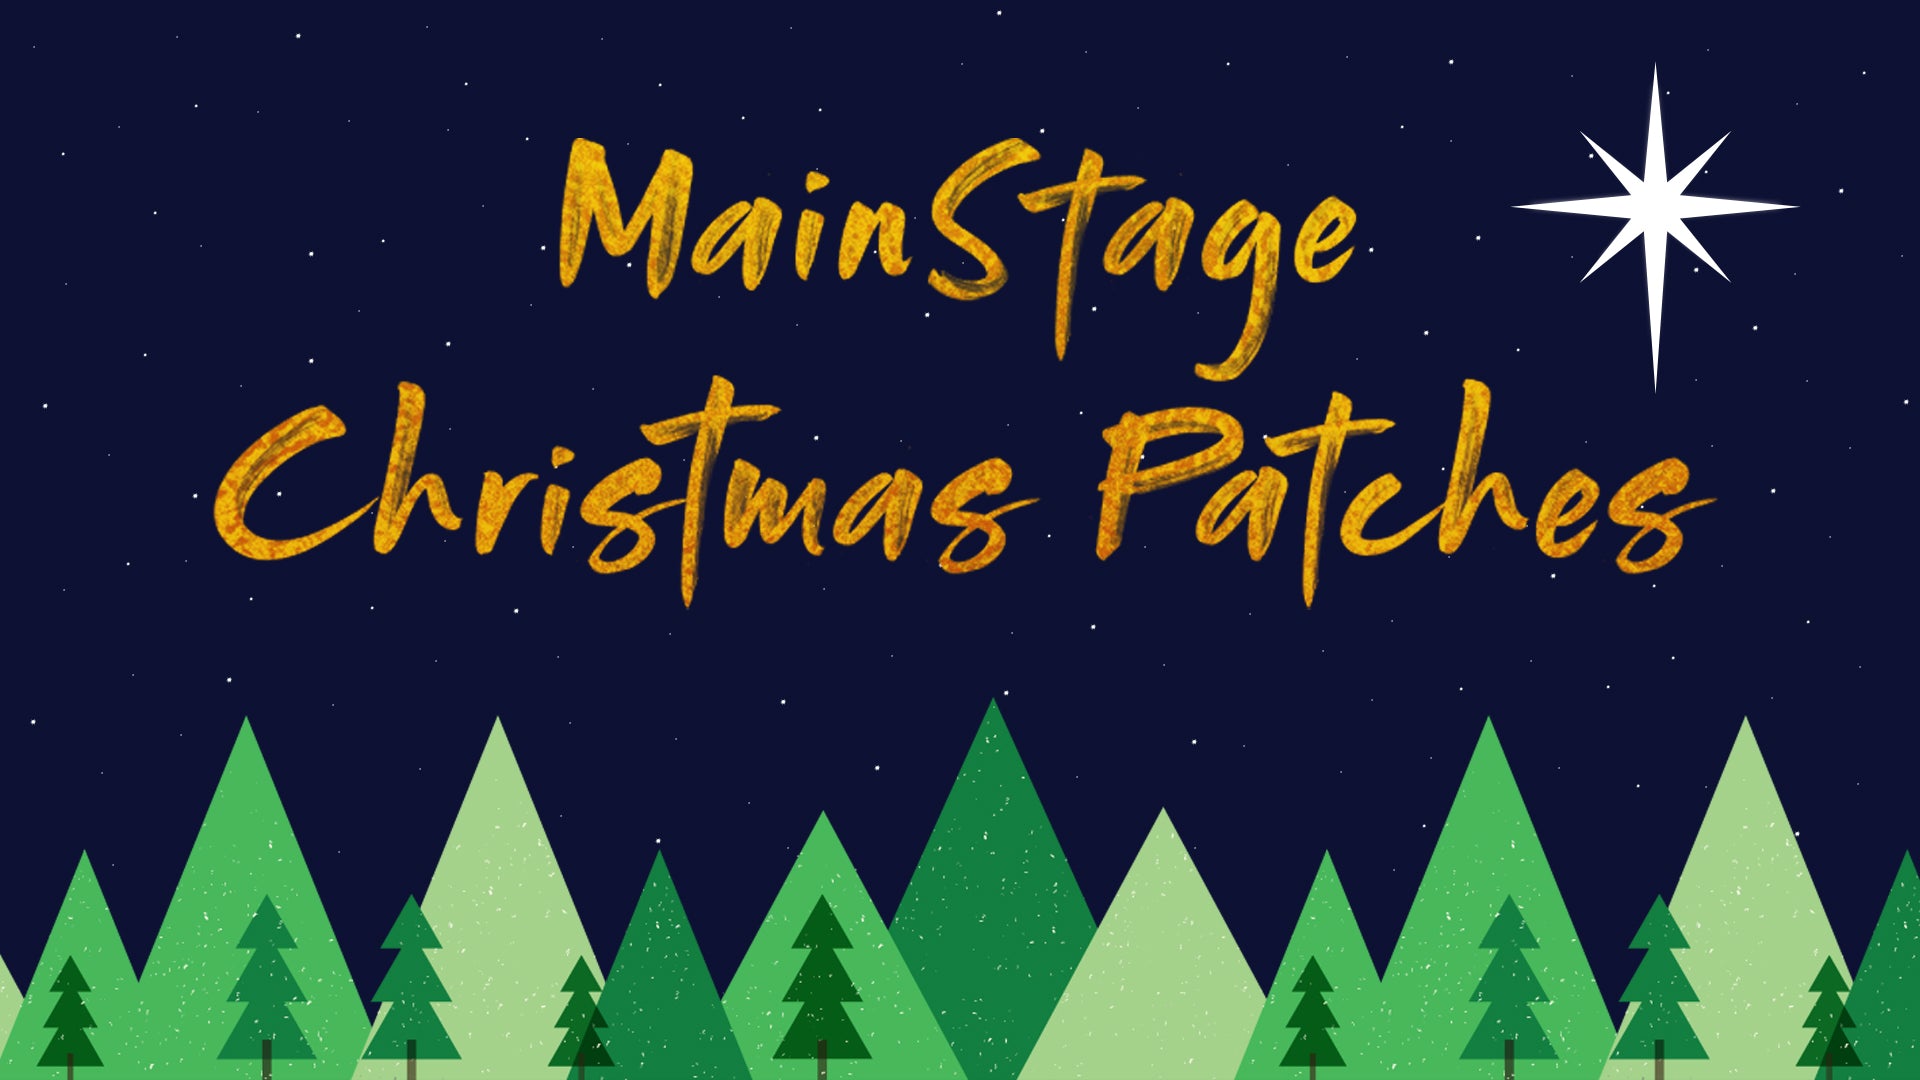 Christmas Patches for MainStage!